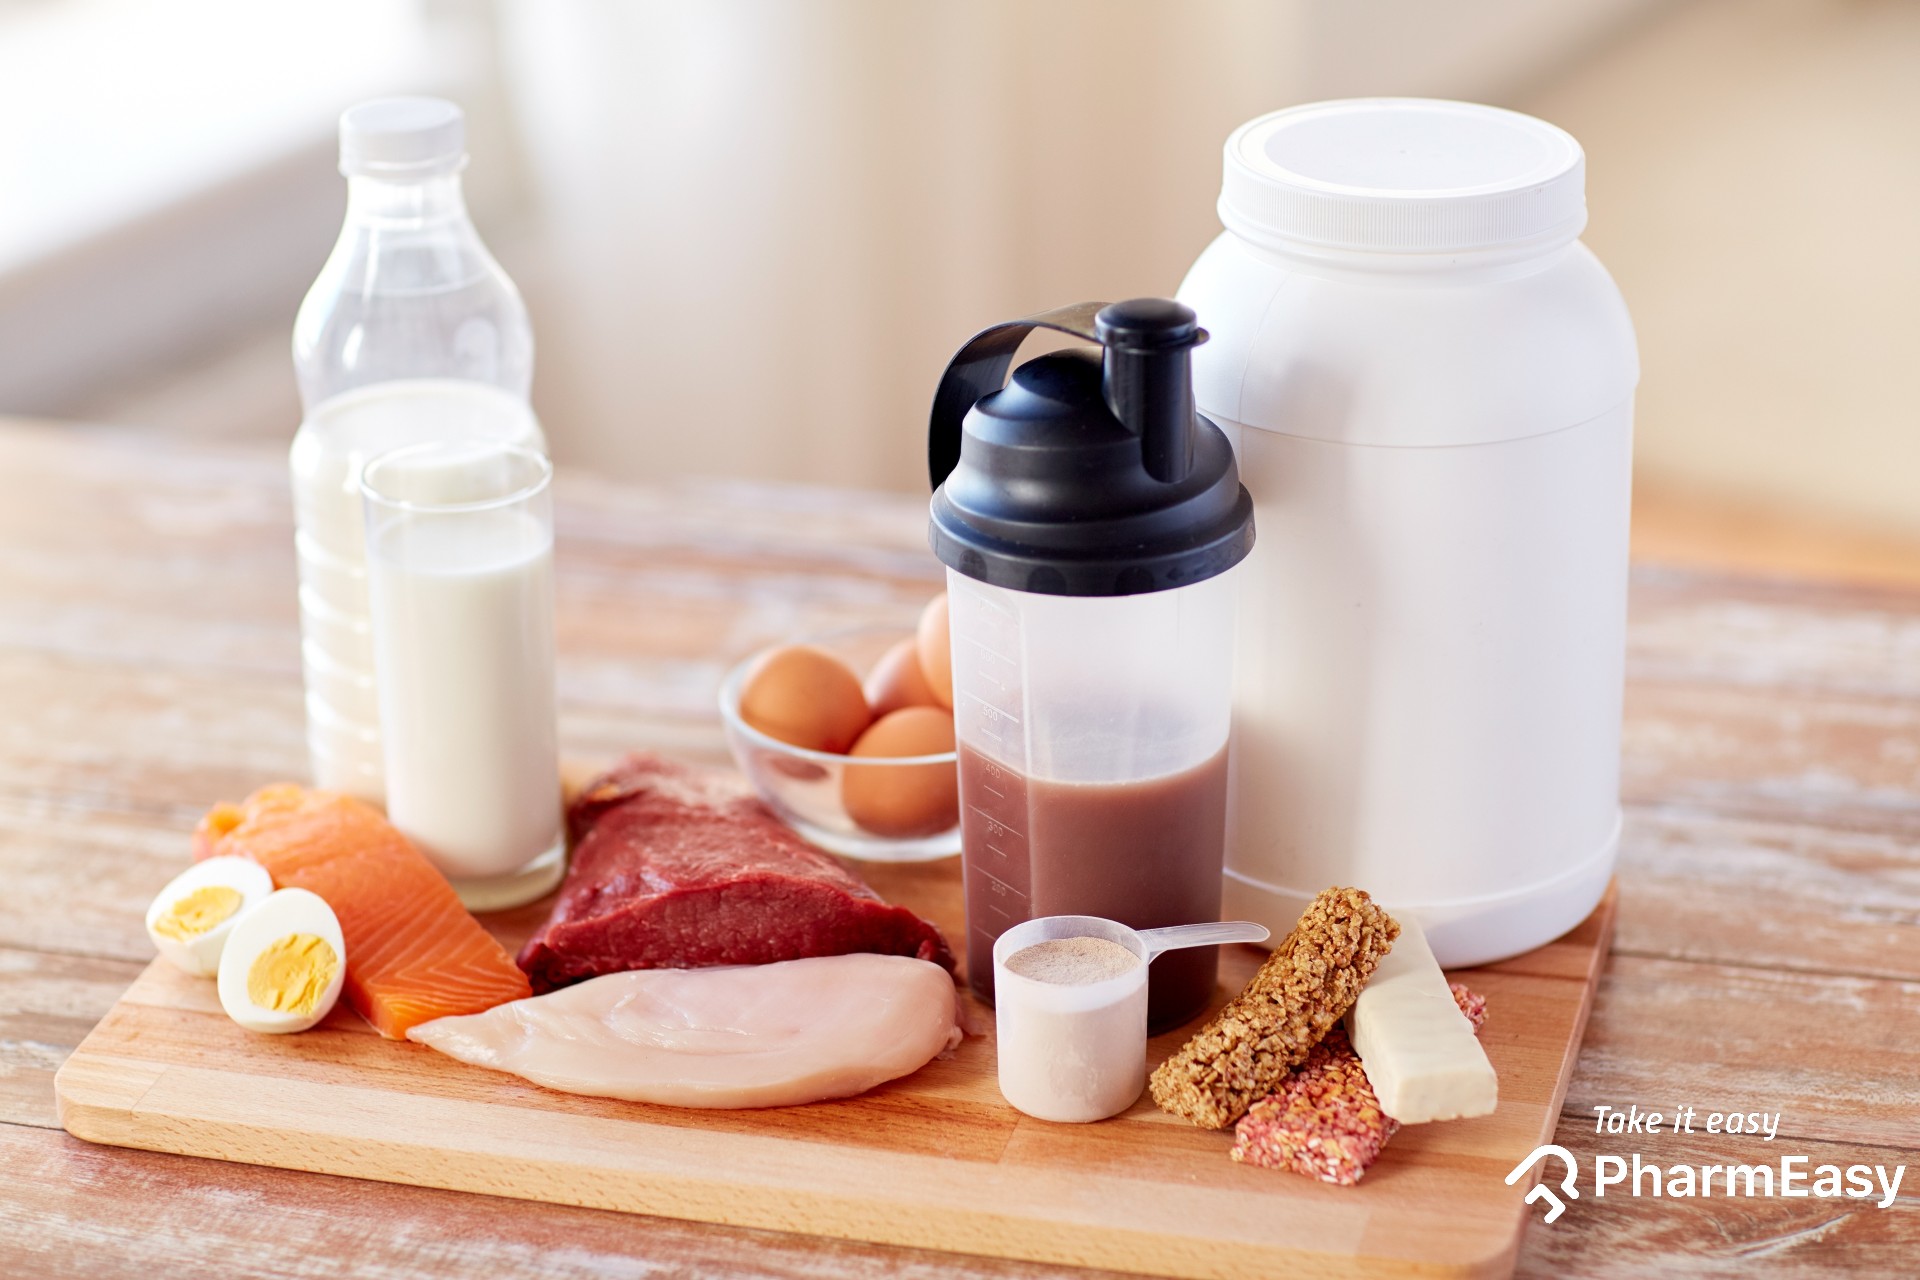 How Much Protein You Should Eat to Build Muscle